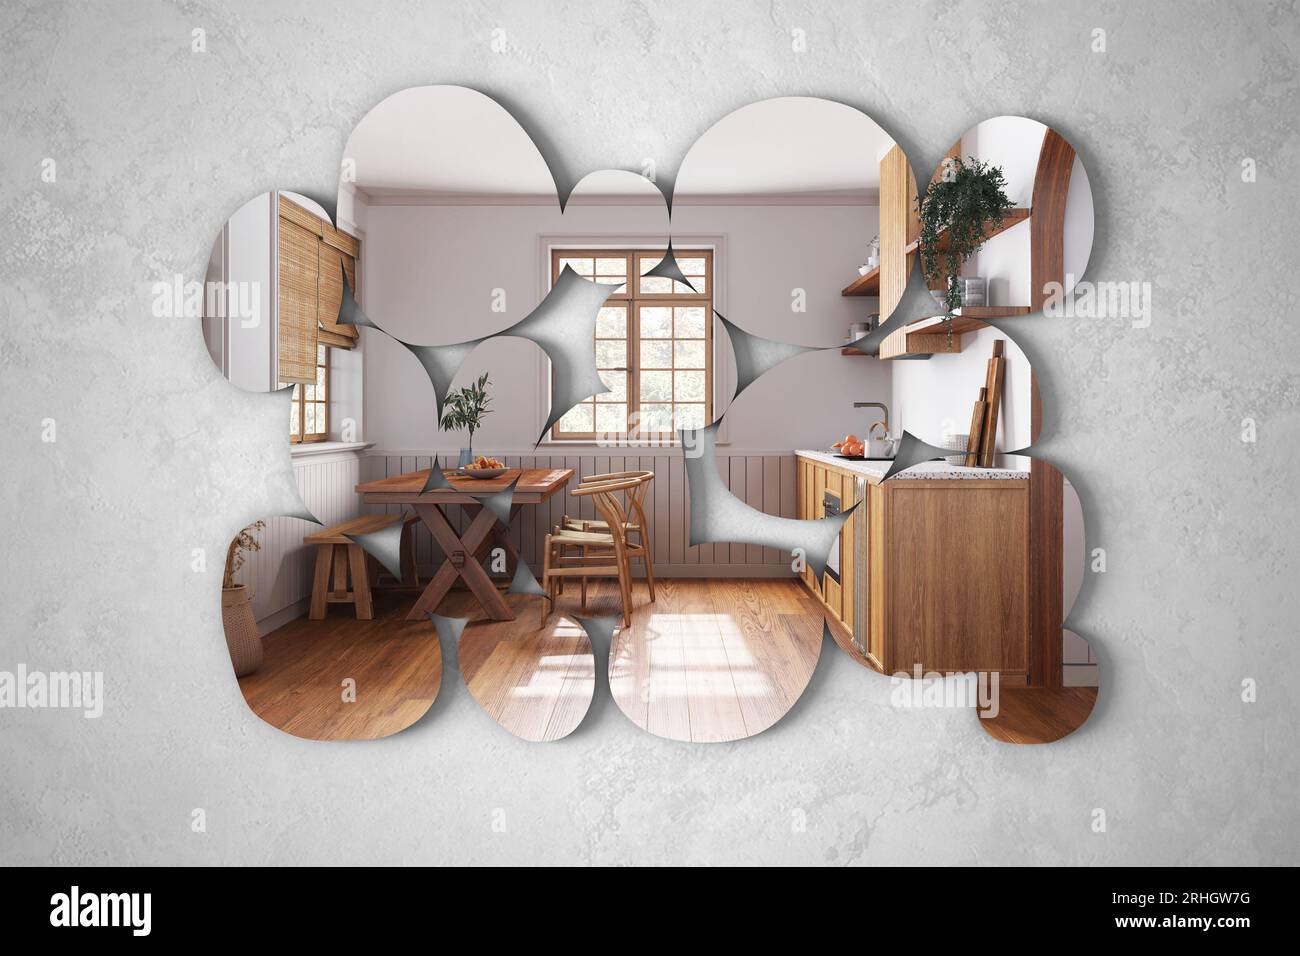 Modern mirror in the shape of pebbles hanging on the wall reflecting interior  design scene, wooden farmhouse kitchen with dining table, architect desi  Stock Photo - Alamy